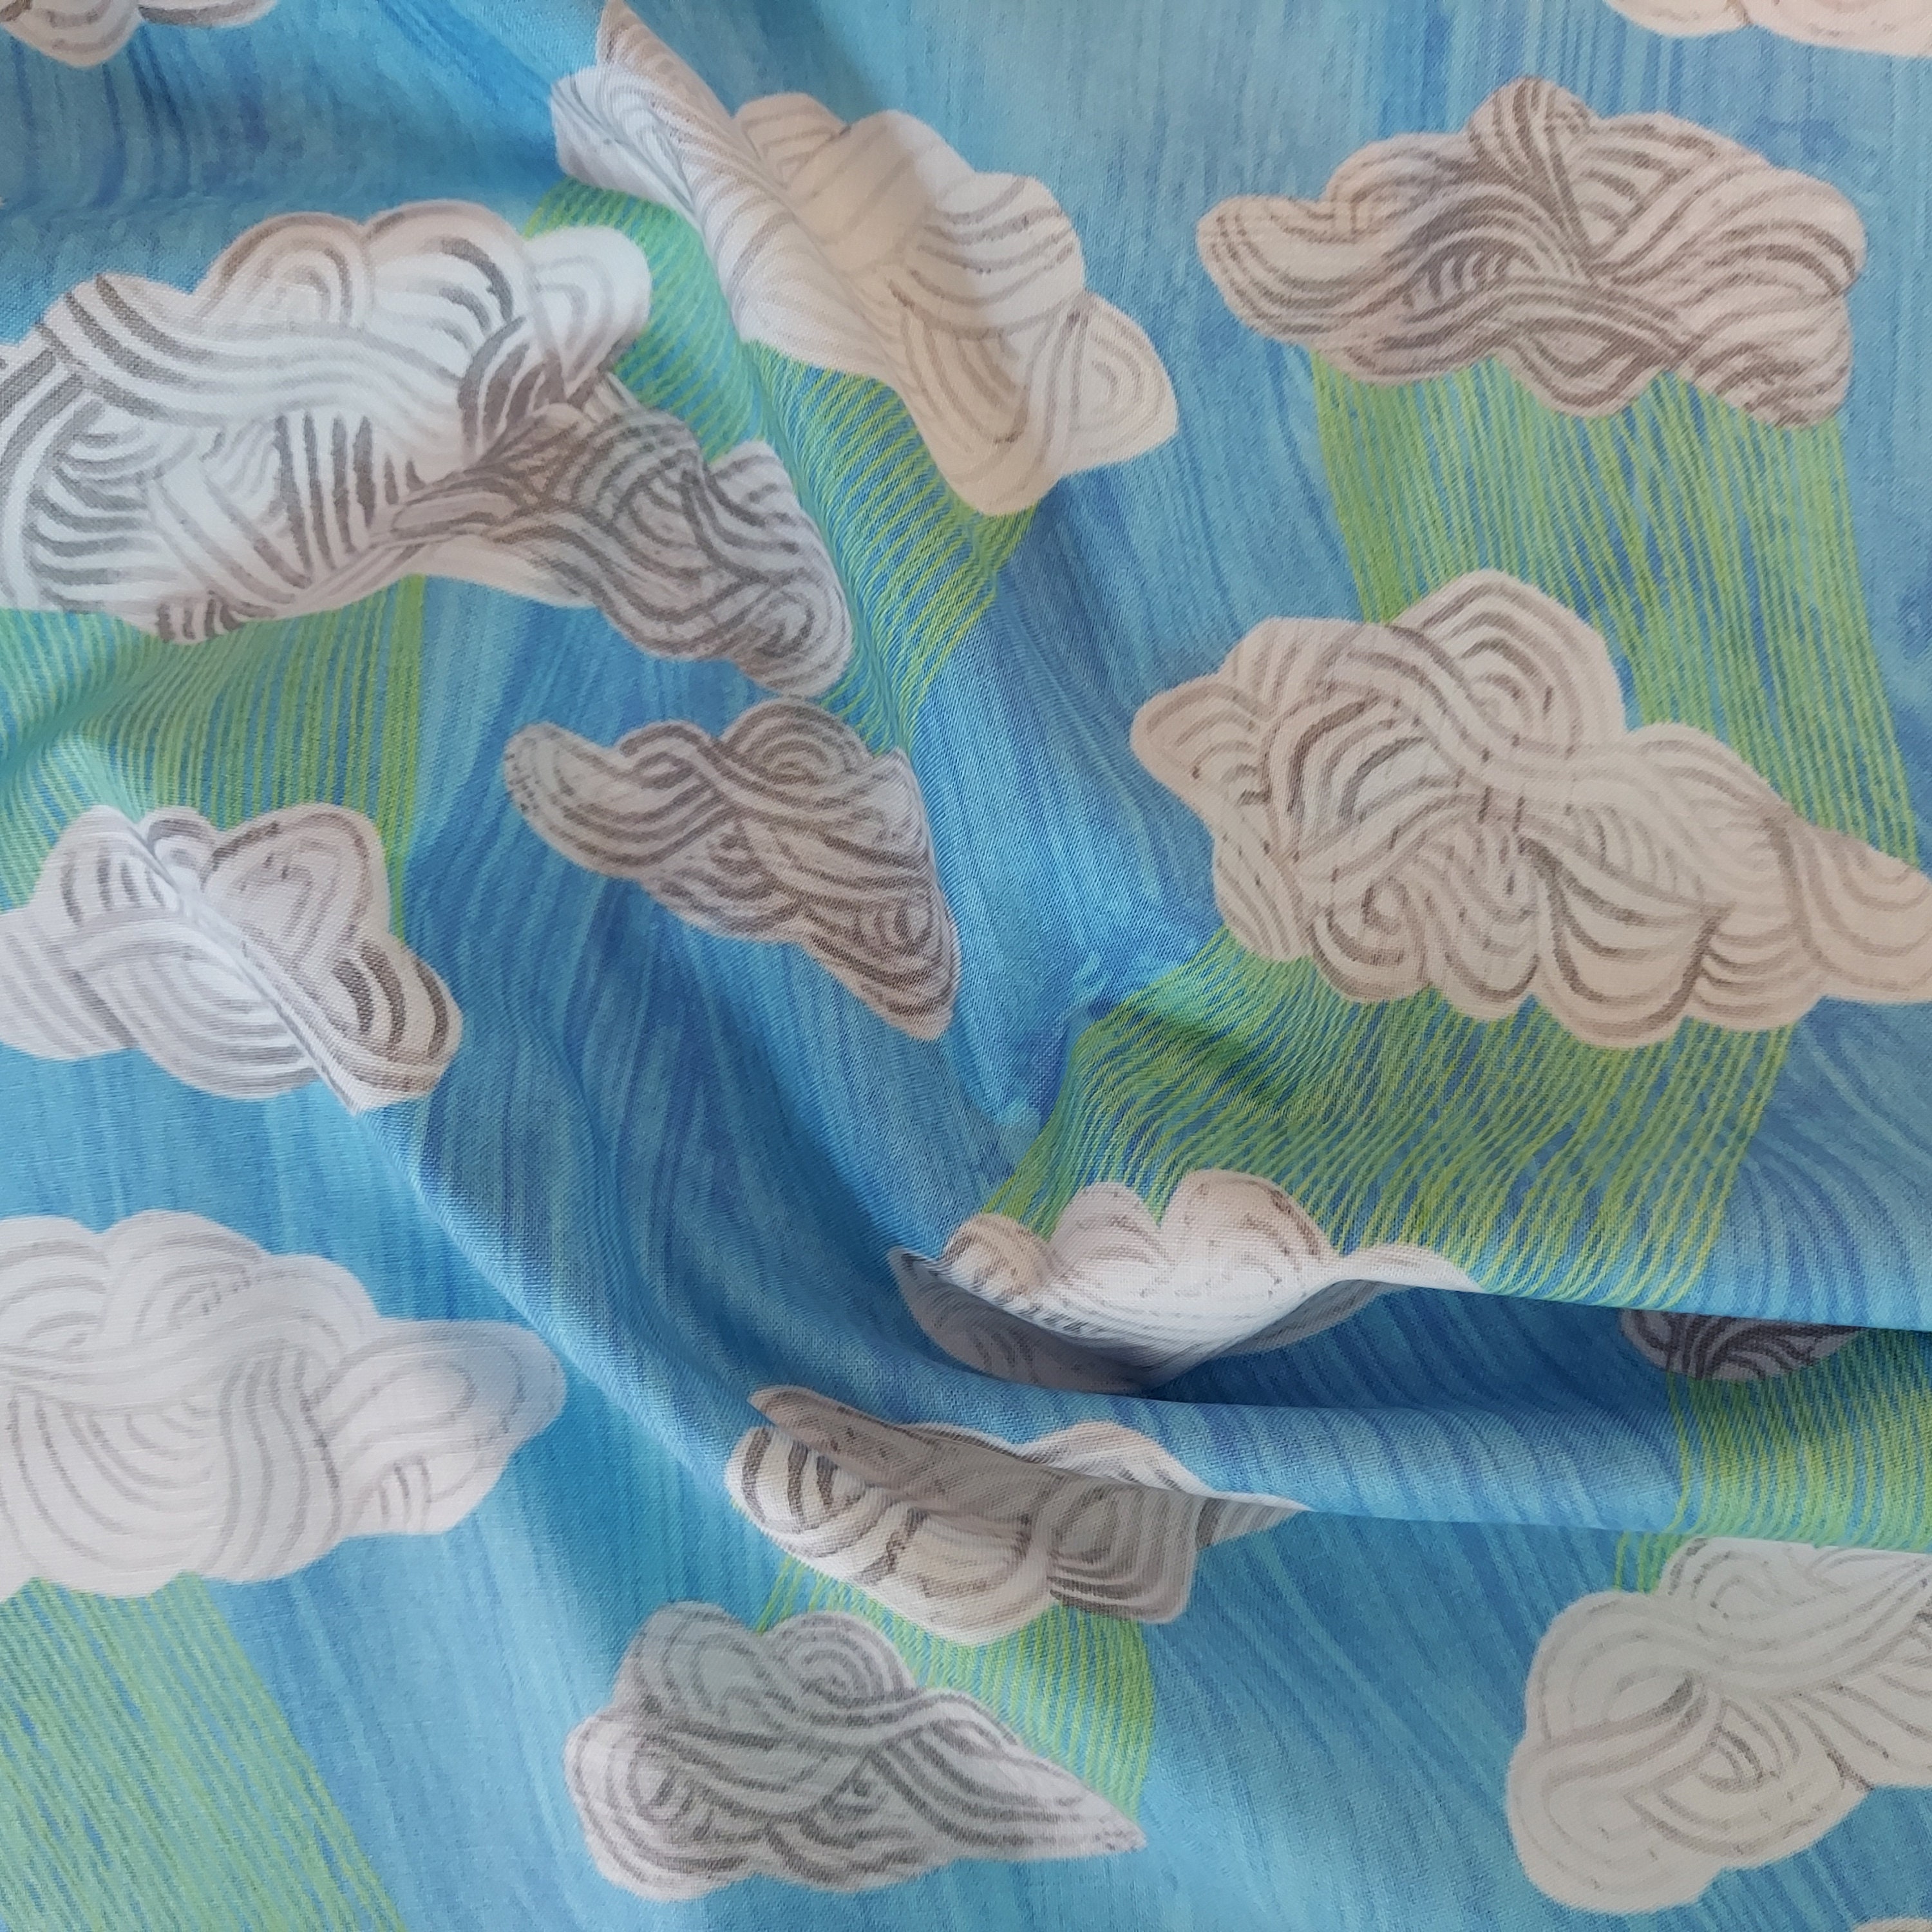 Happy Quilt Fabric - Silver Lining Clouds in Cornflower Blue